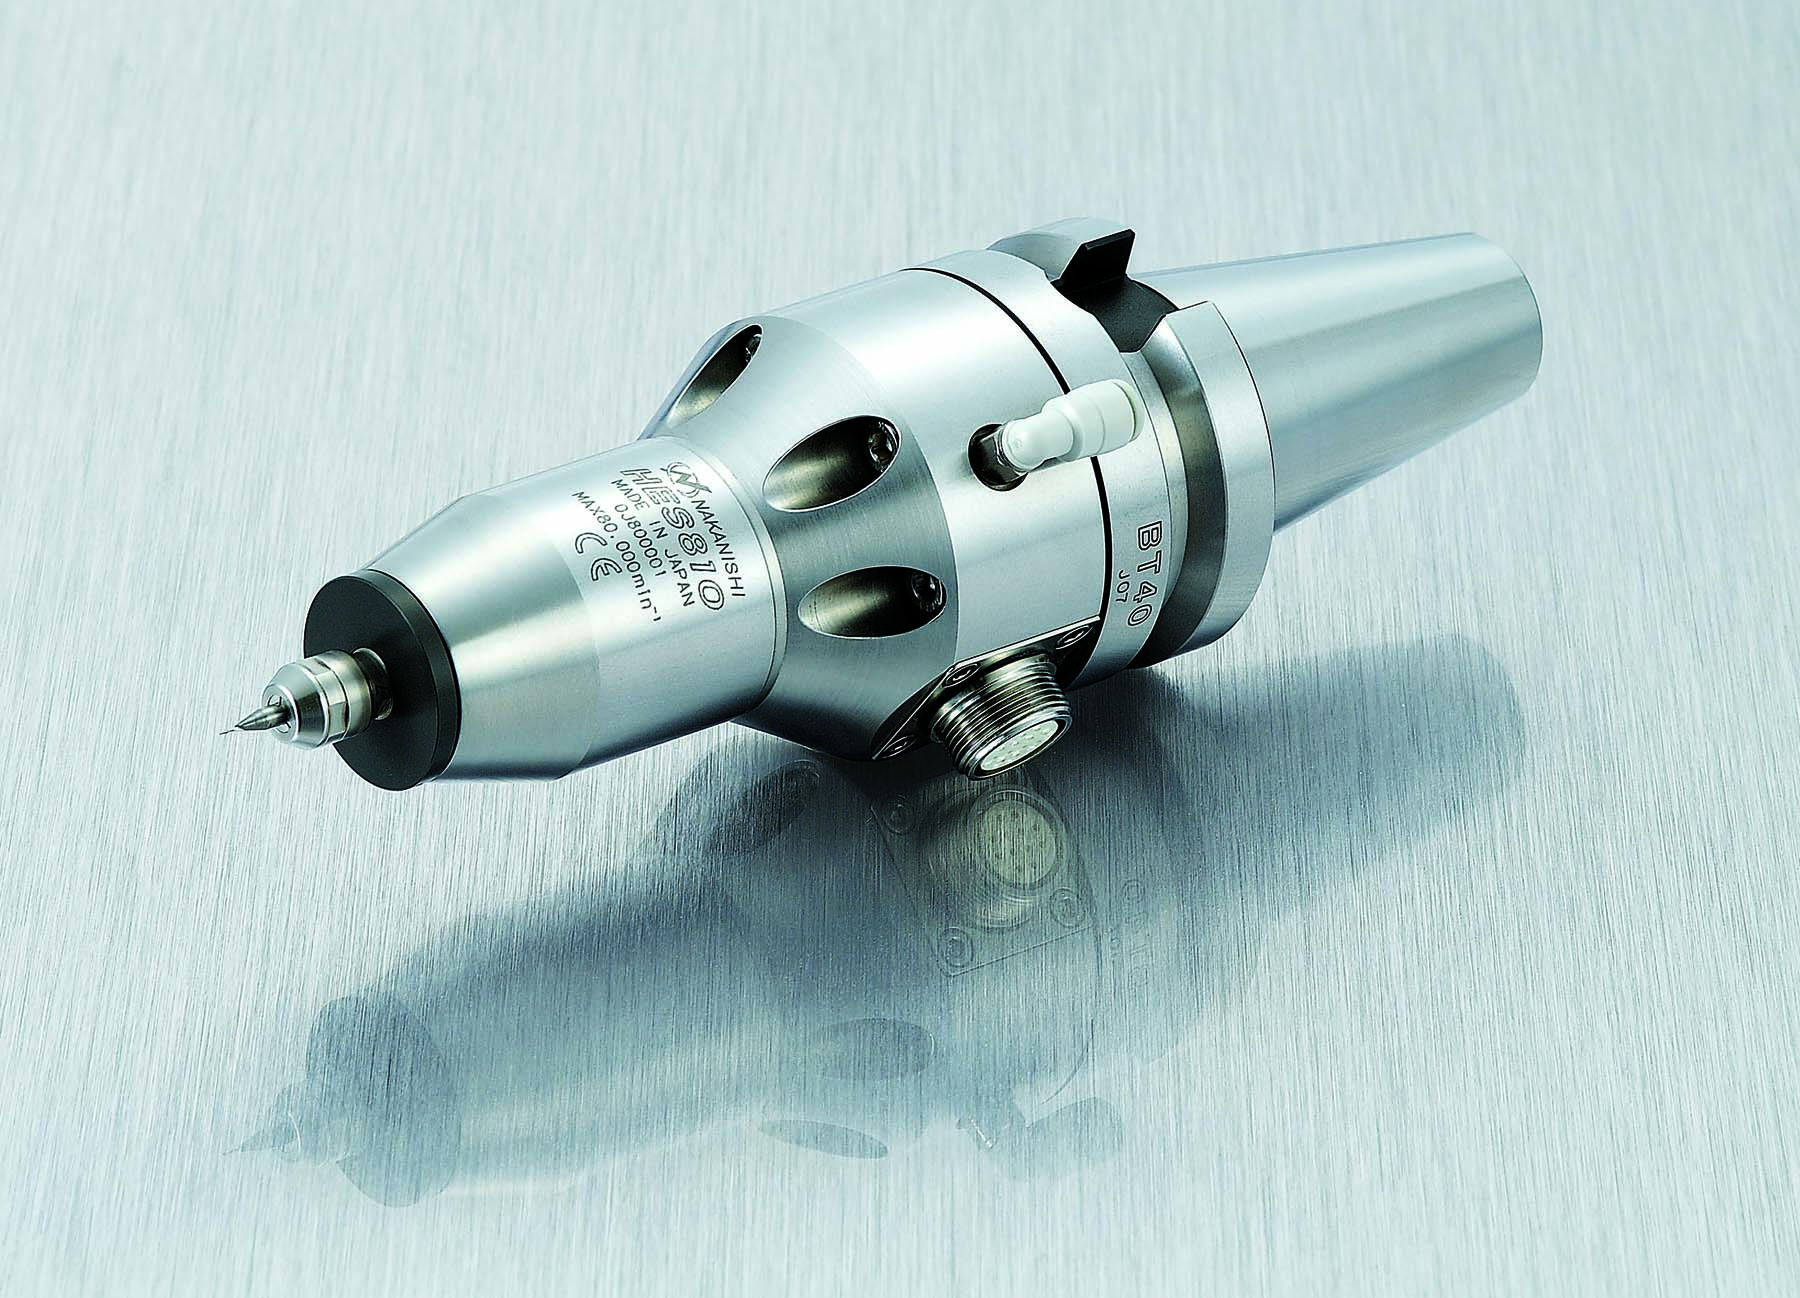  NSK America’s high-speed electric spindles allow users to run OSG USA’s microtools at the intended surface footage.